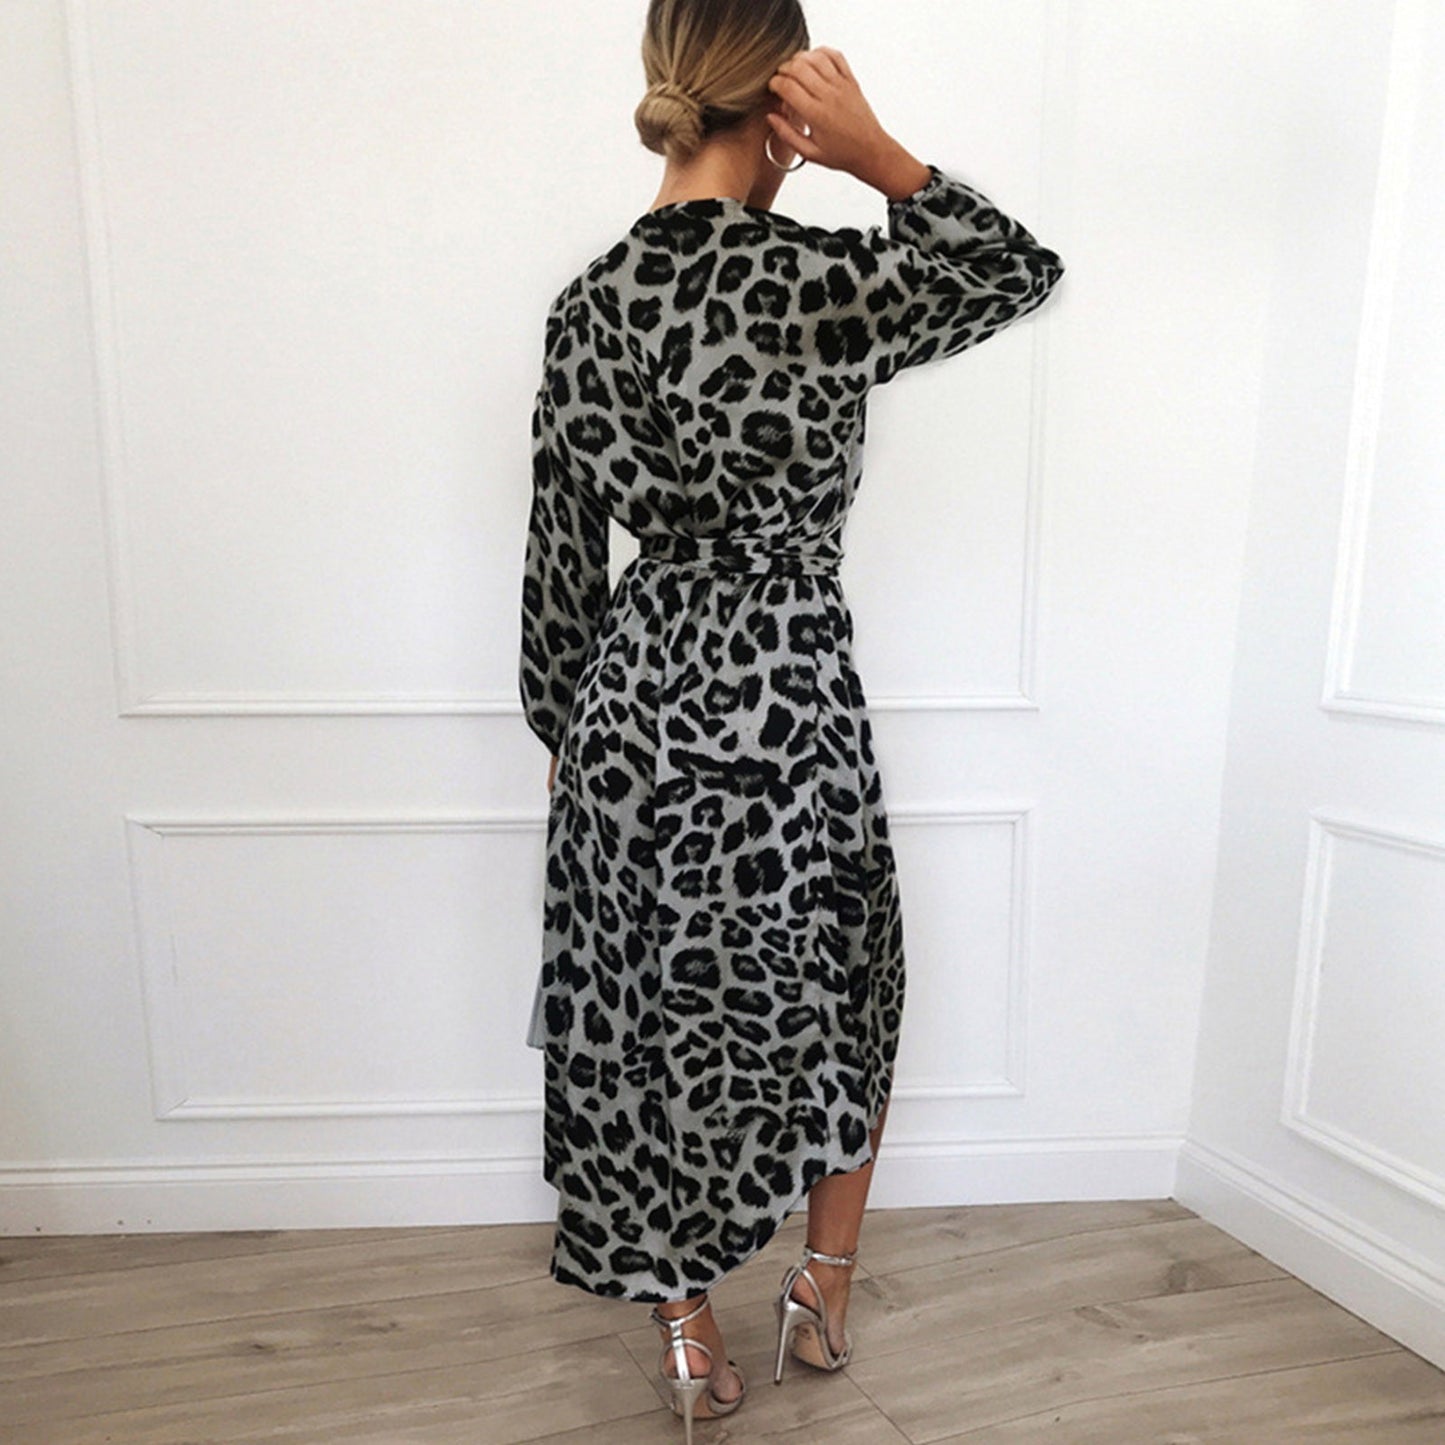 black and white leopard dress